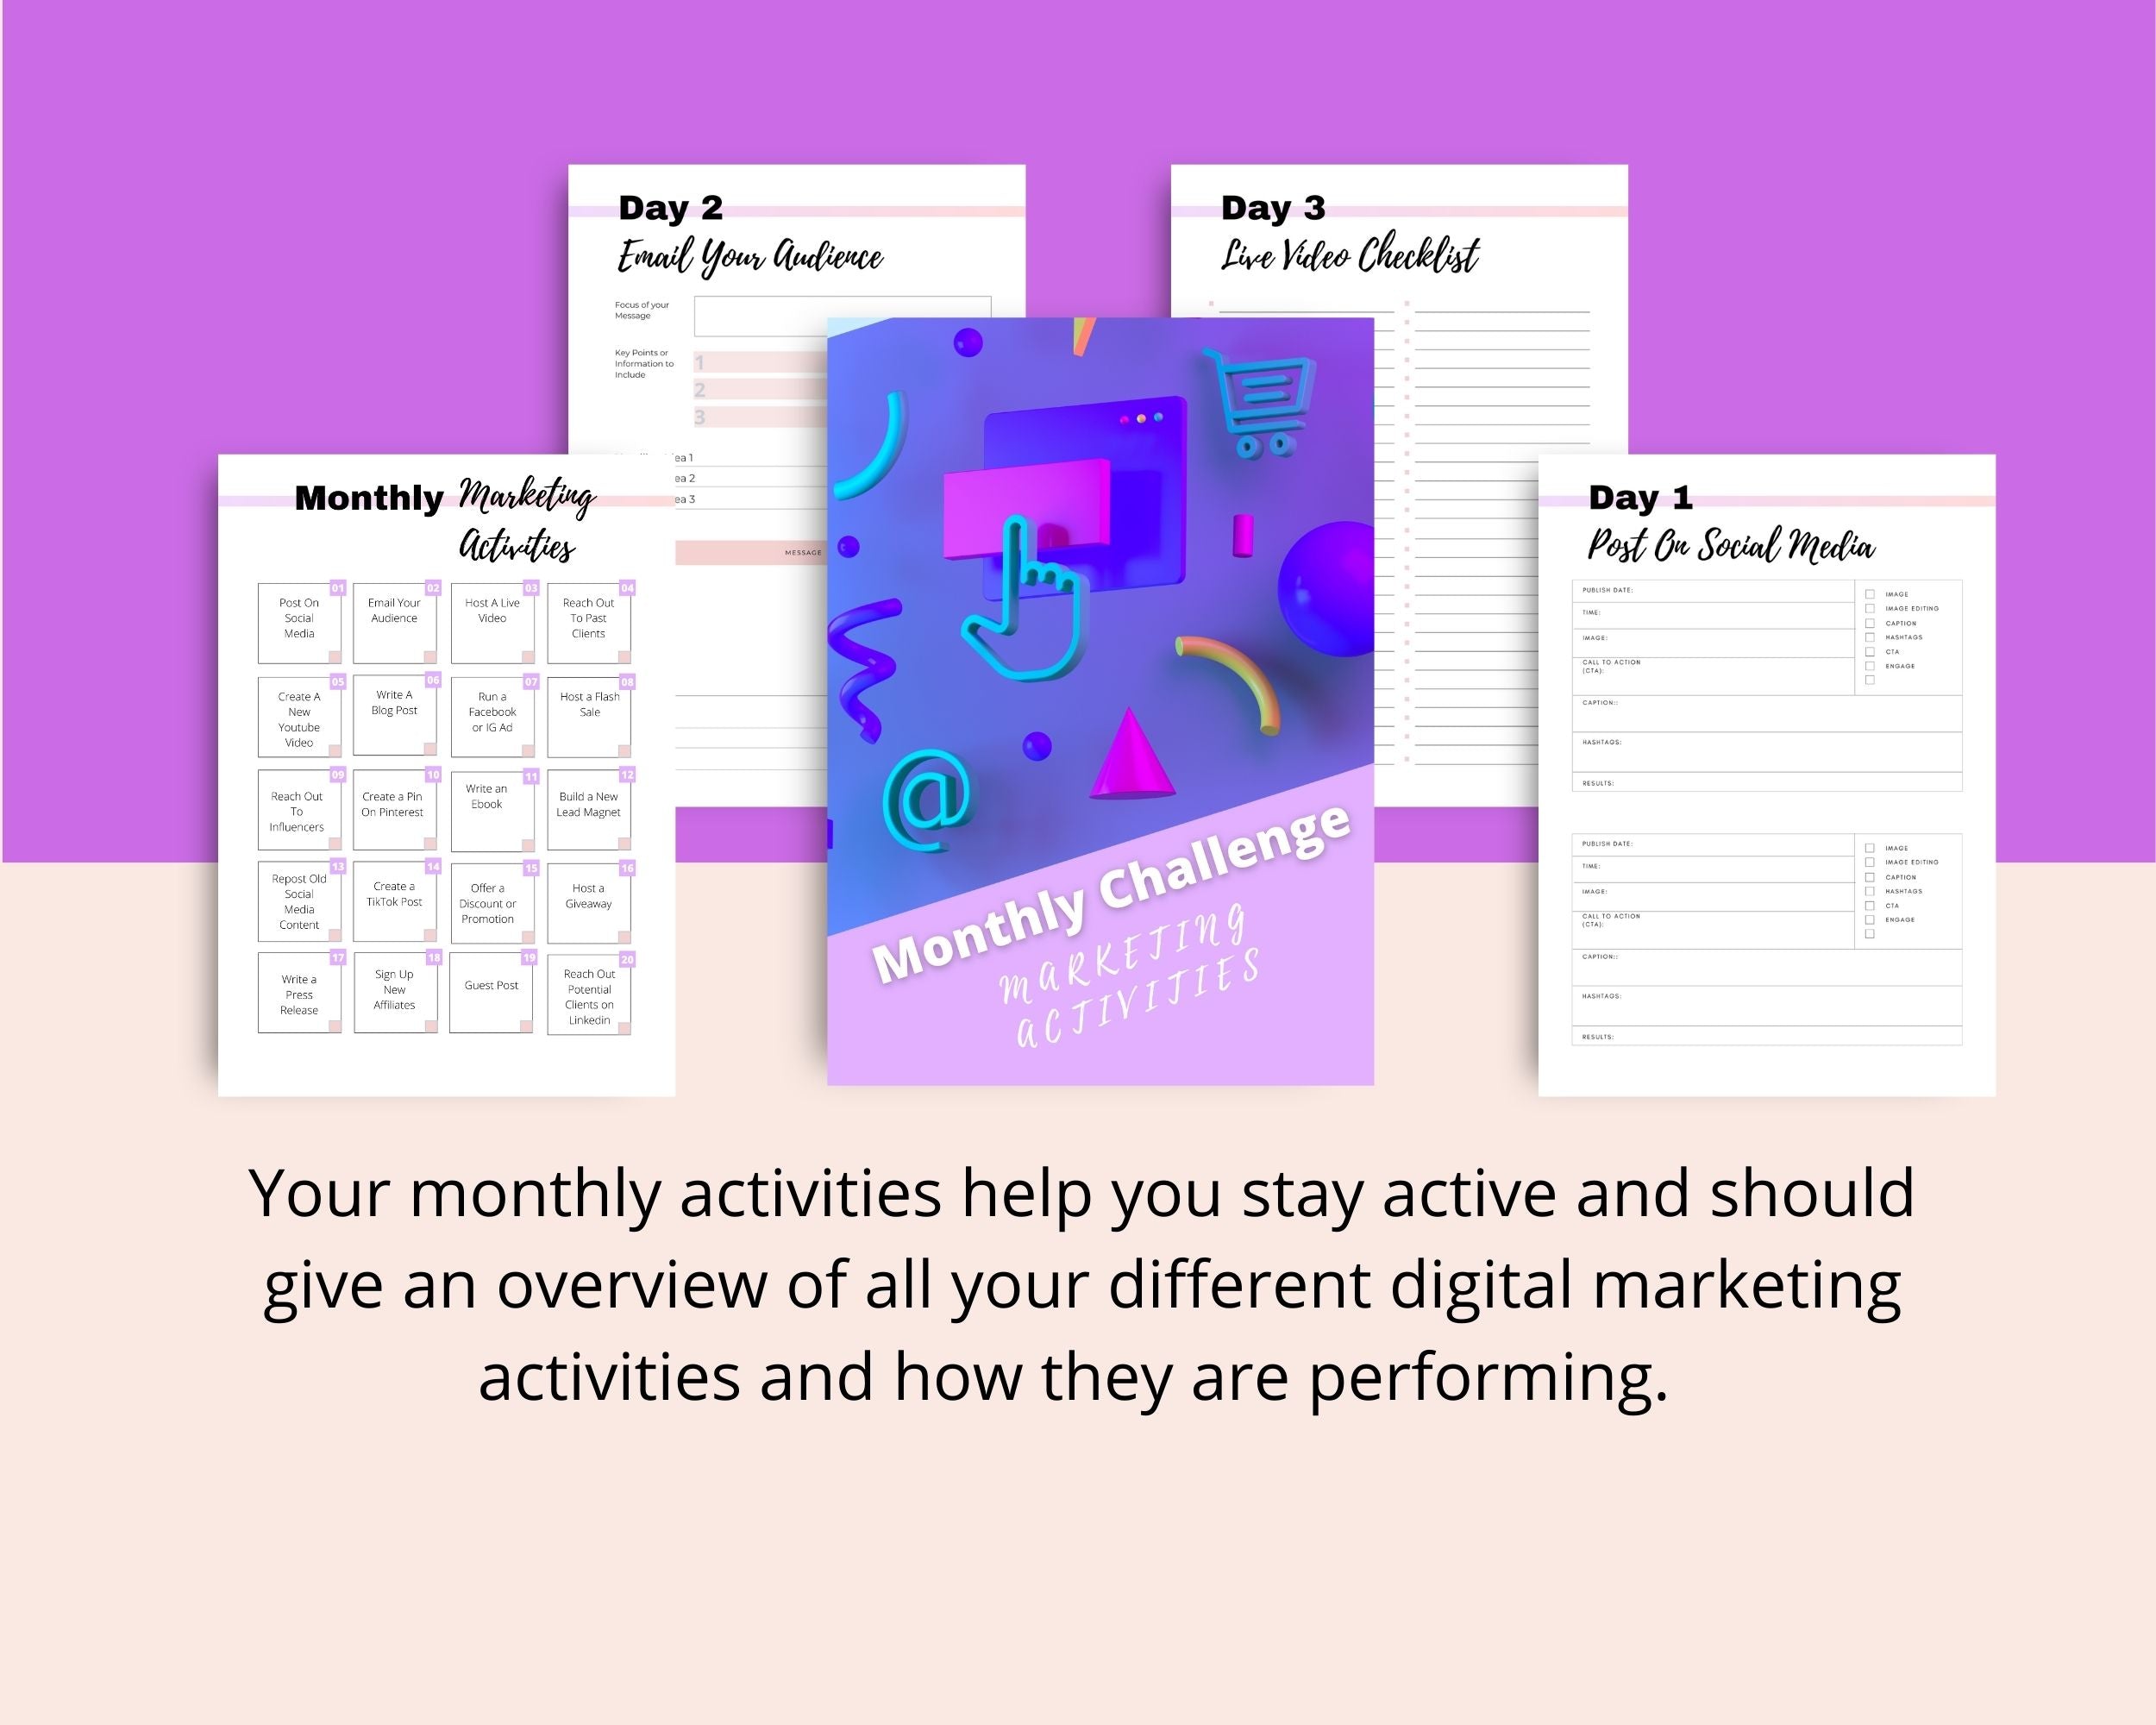 Monthly Marketing Activities Challenge | Editable Canva Template A4 Size